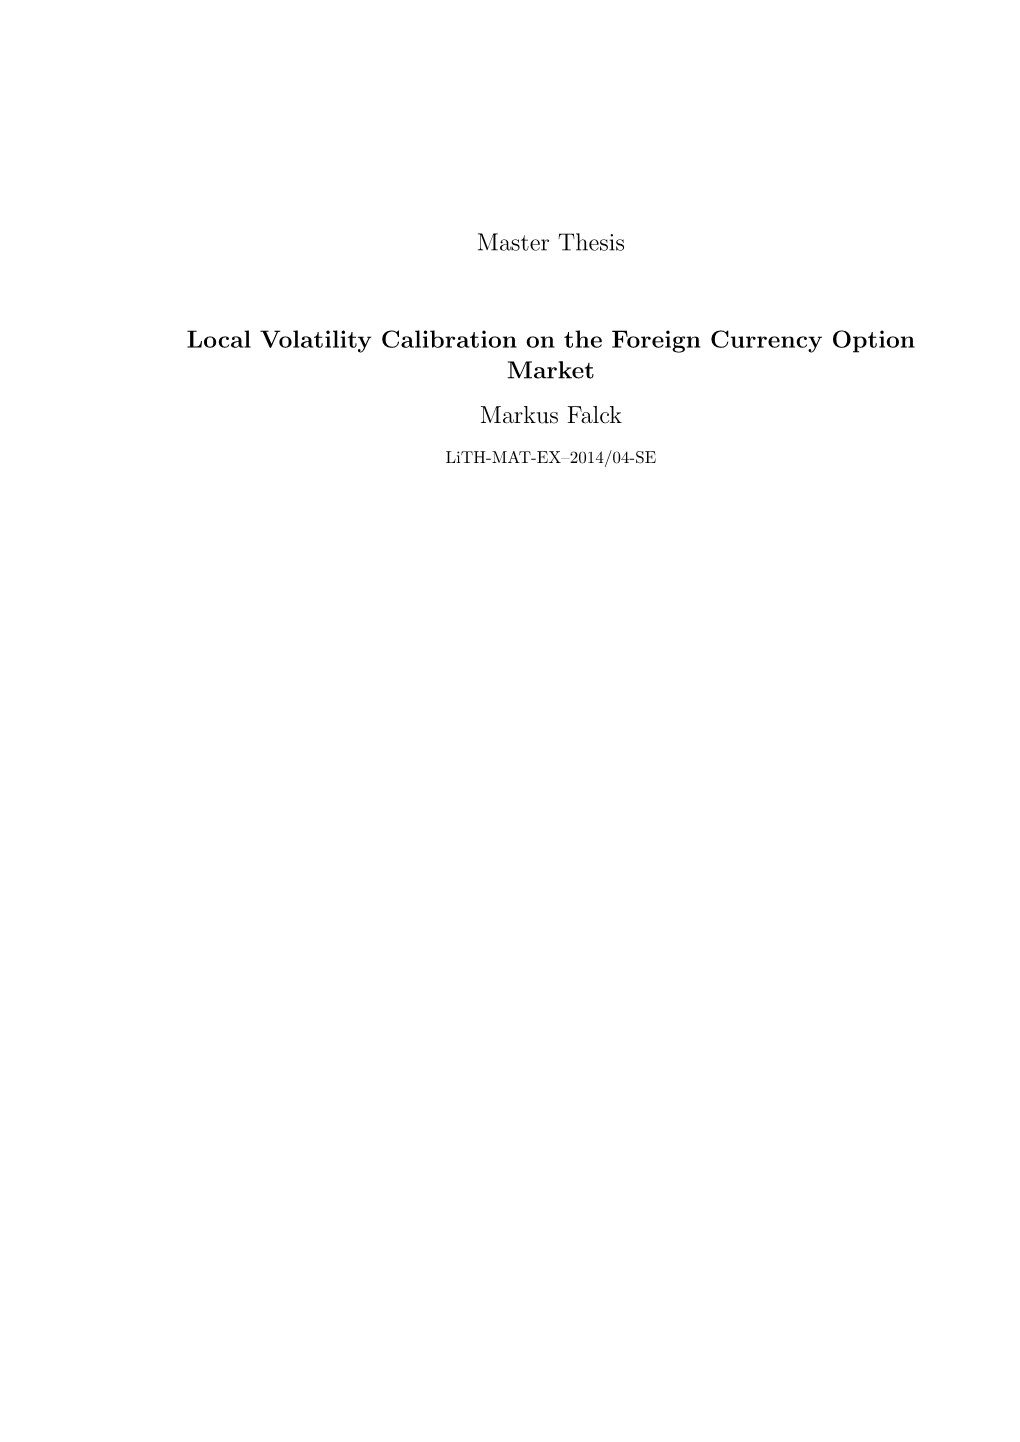 Master Thesis Local Volatility Calibration on the Foreign Currency Option Market Markus Falck